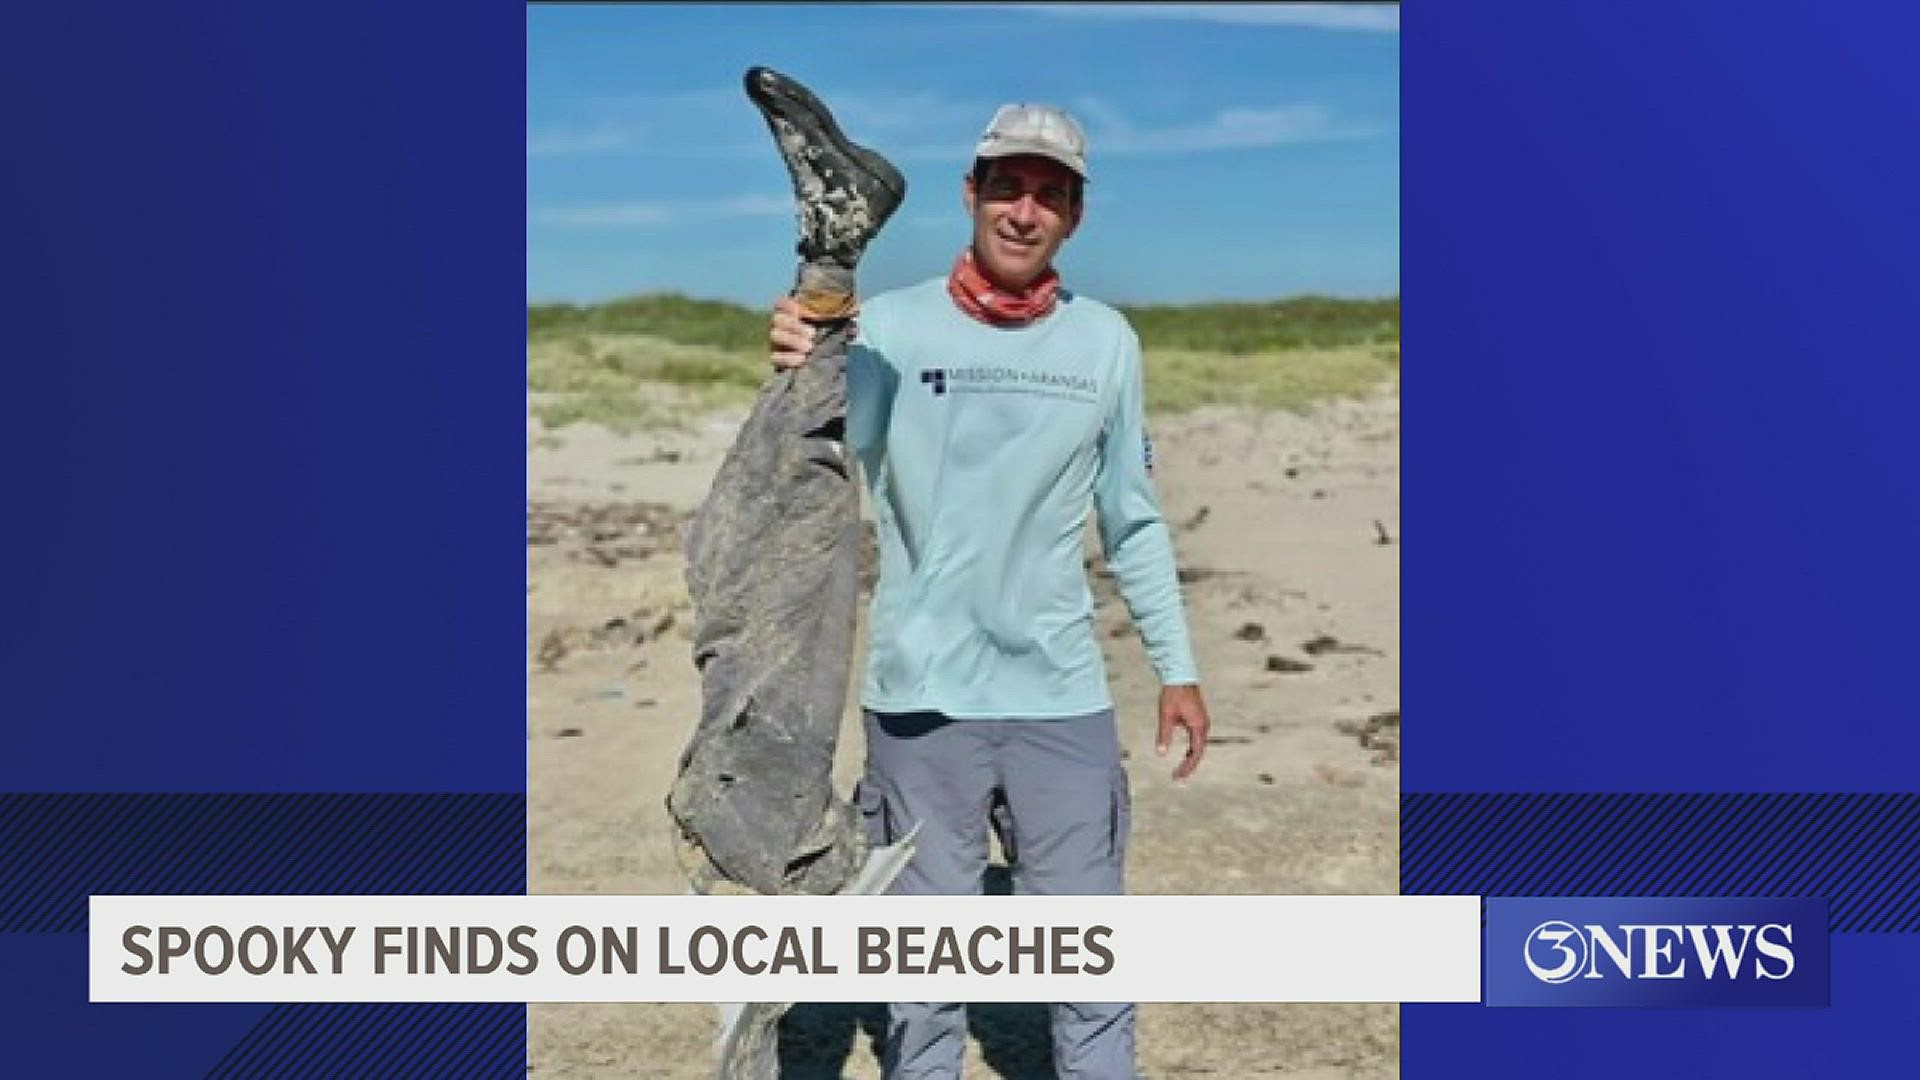 Not even six months after going viral for discovering a series of creepy dolls, the Mission-Aransas Reserve found a creepy fake leg on the beach this week.